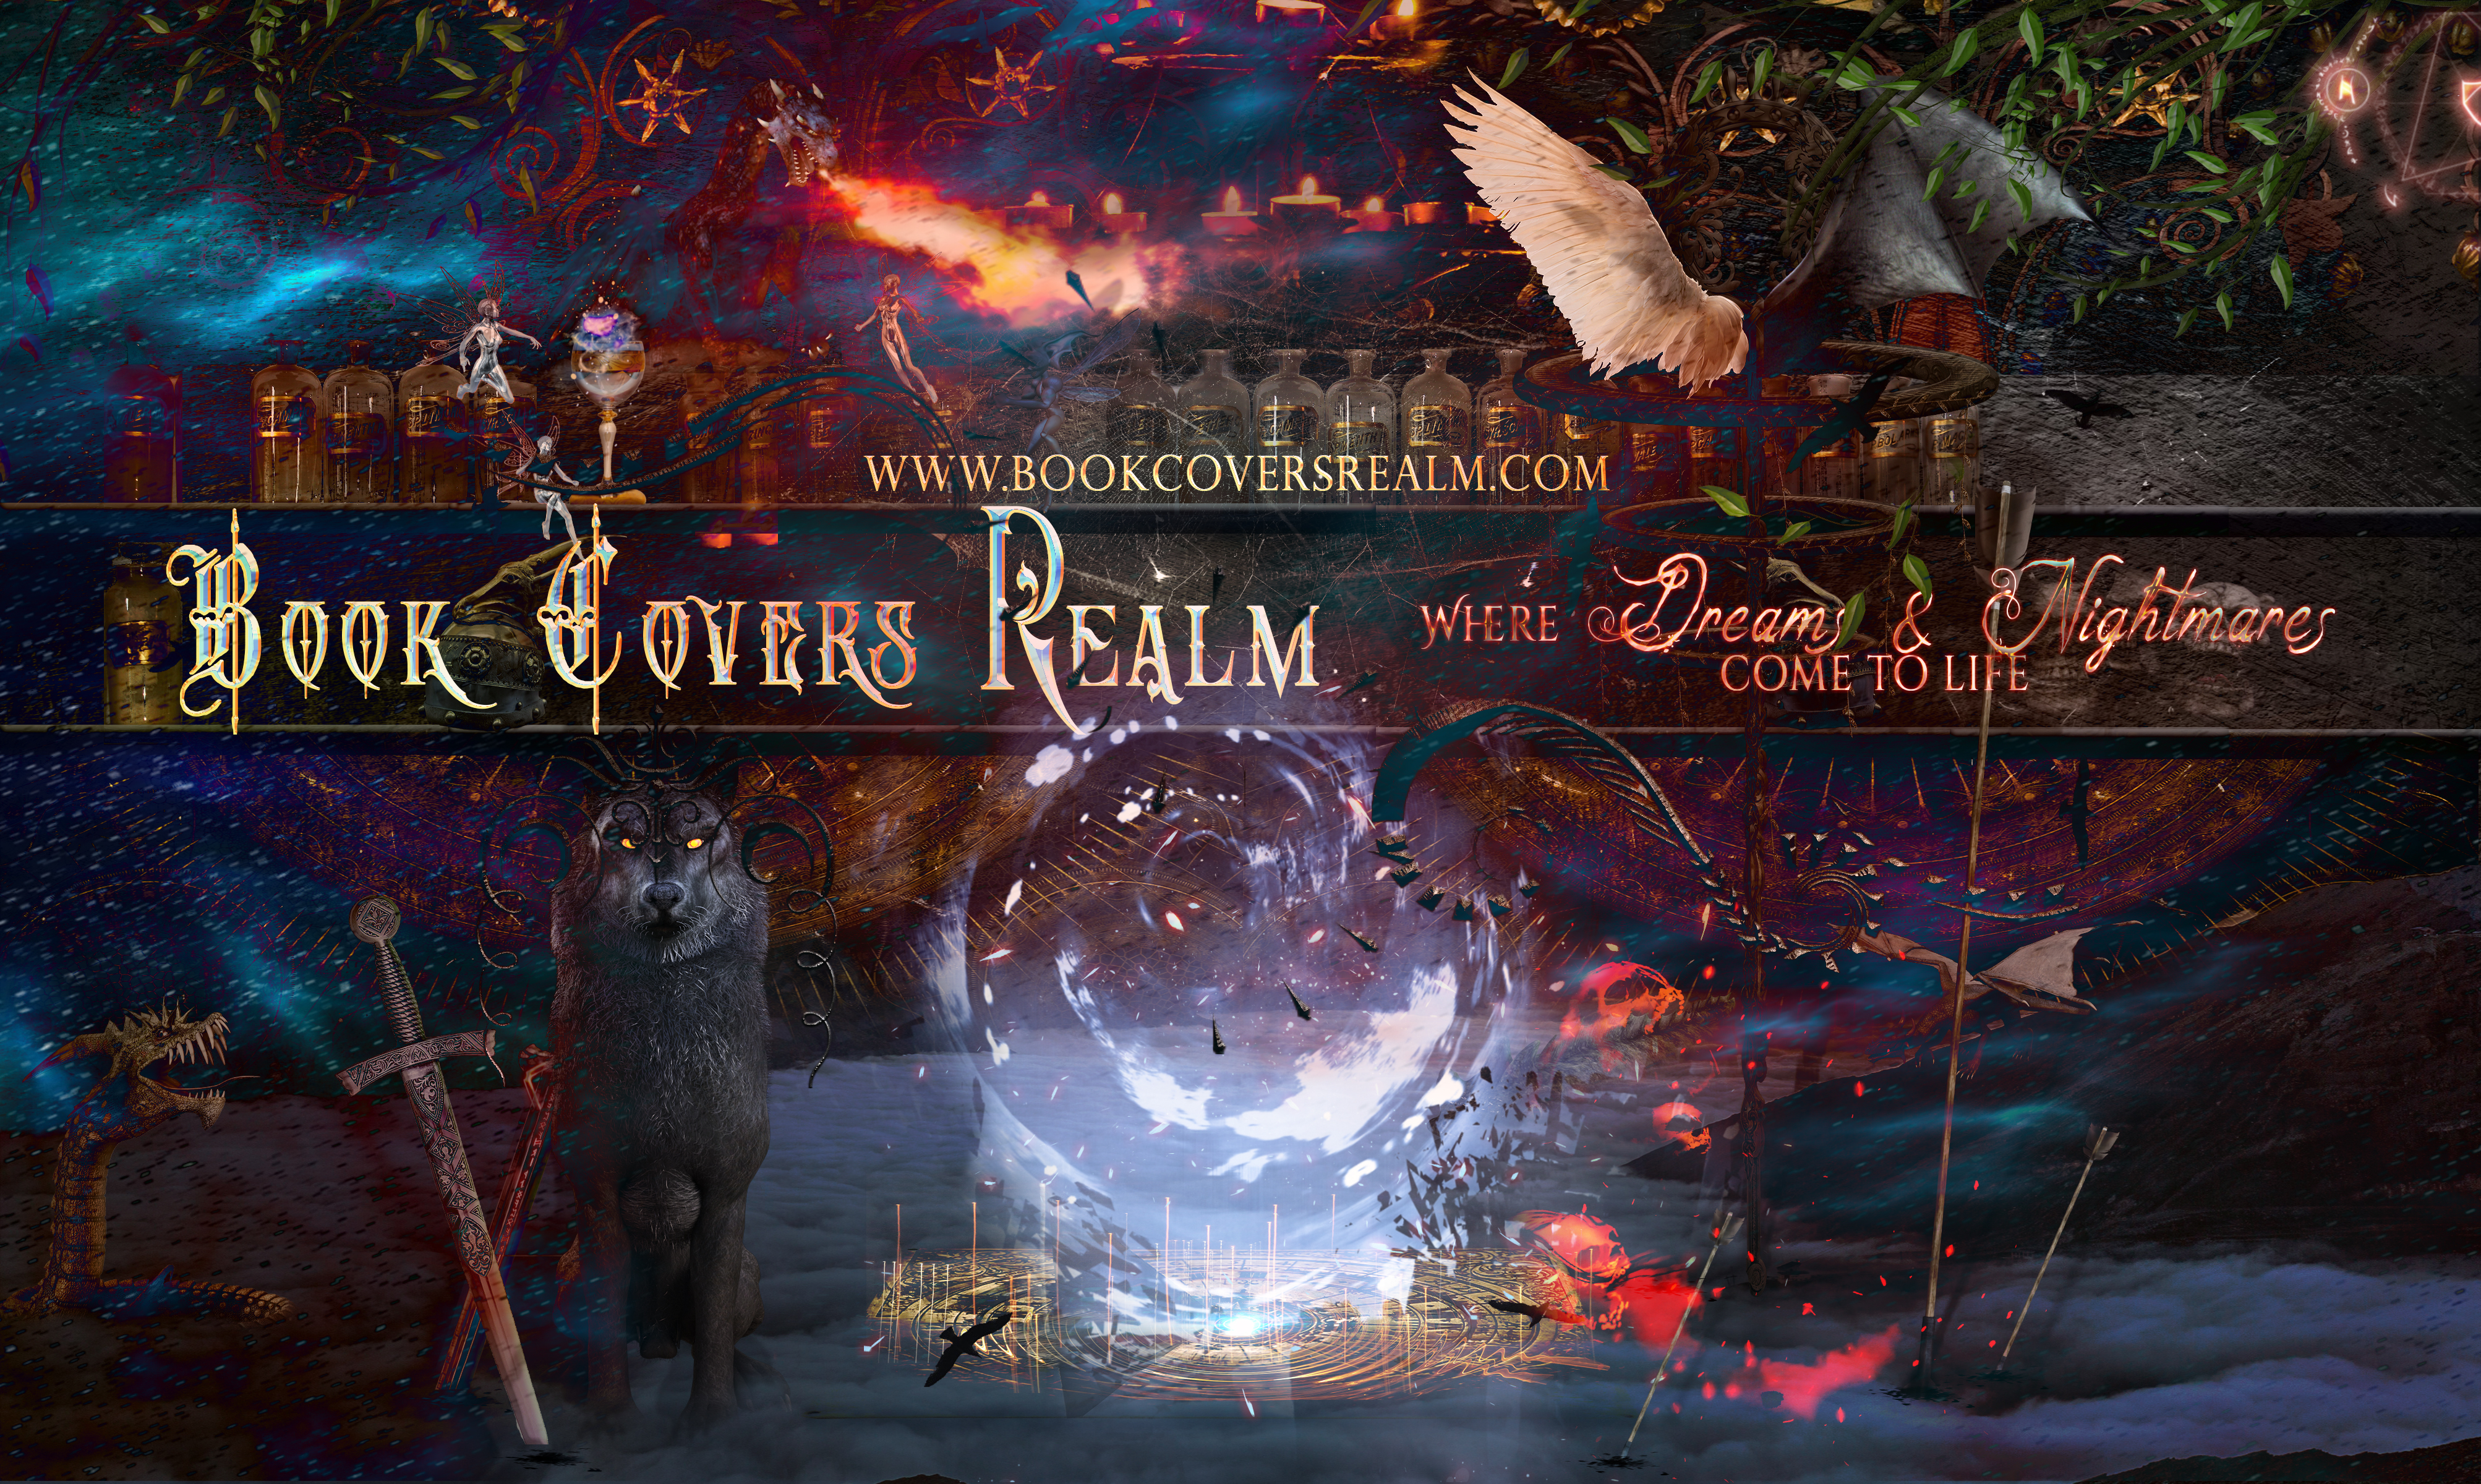 book cover realm banner 3